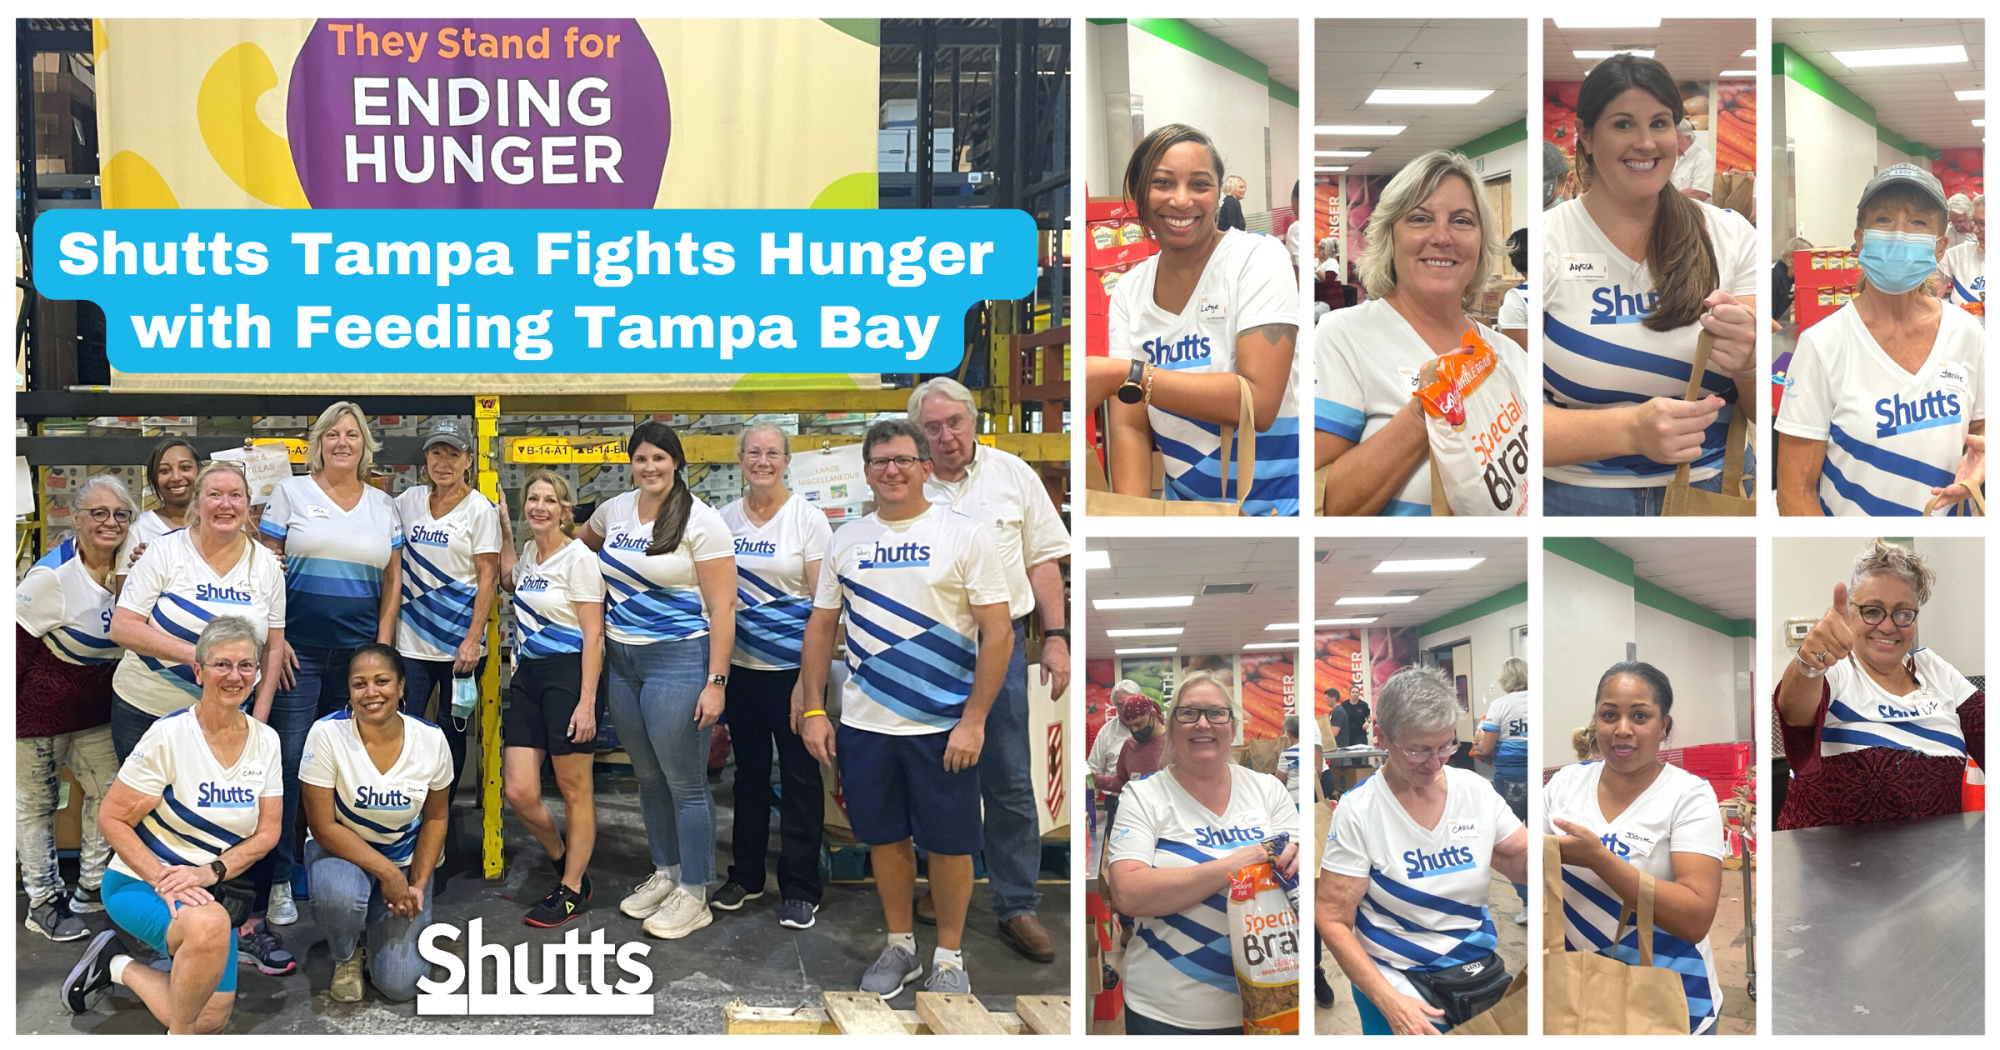 Shutts Tampa Fights Hunger with Feeding Tampa Bay